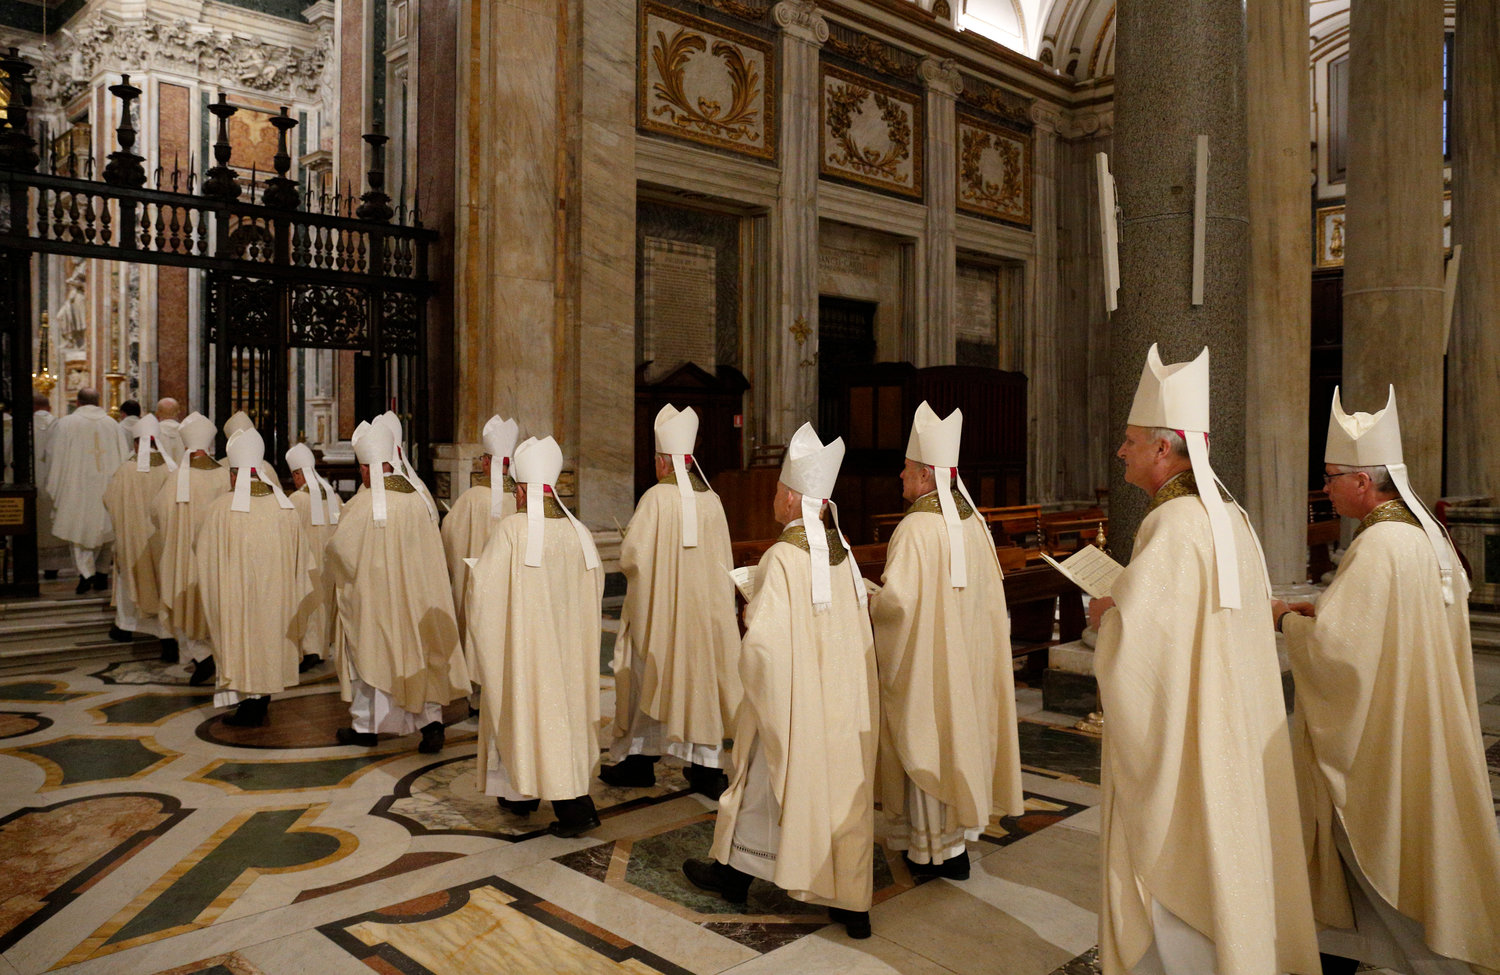 U.S. bishops from Iowa, Kansas, Missouri and Nebraska arrive in procession to concelebrate Mass at the Basilica of St. Mary Major in Rome Jan. 14, 2020. The bishops were making their "ad limina" visits to the Vatican to report on the status of their dioceses to the pope and Vatican officials.